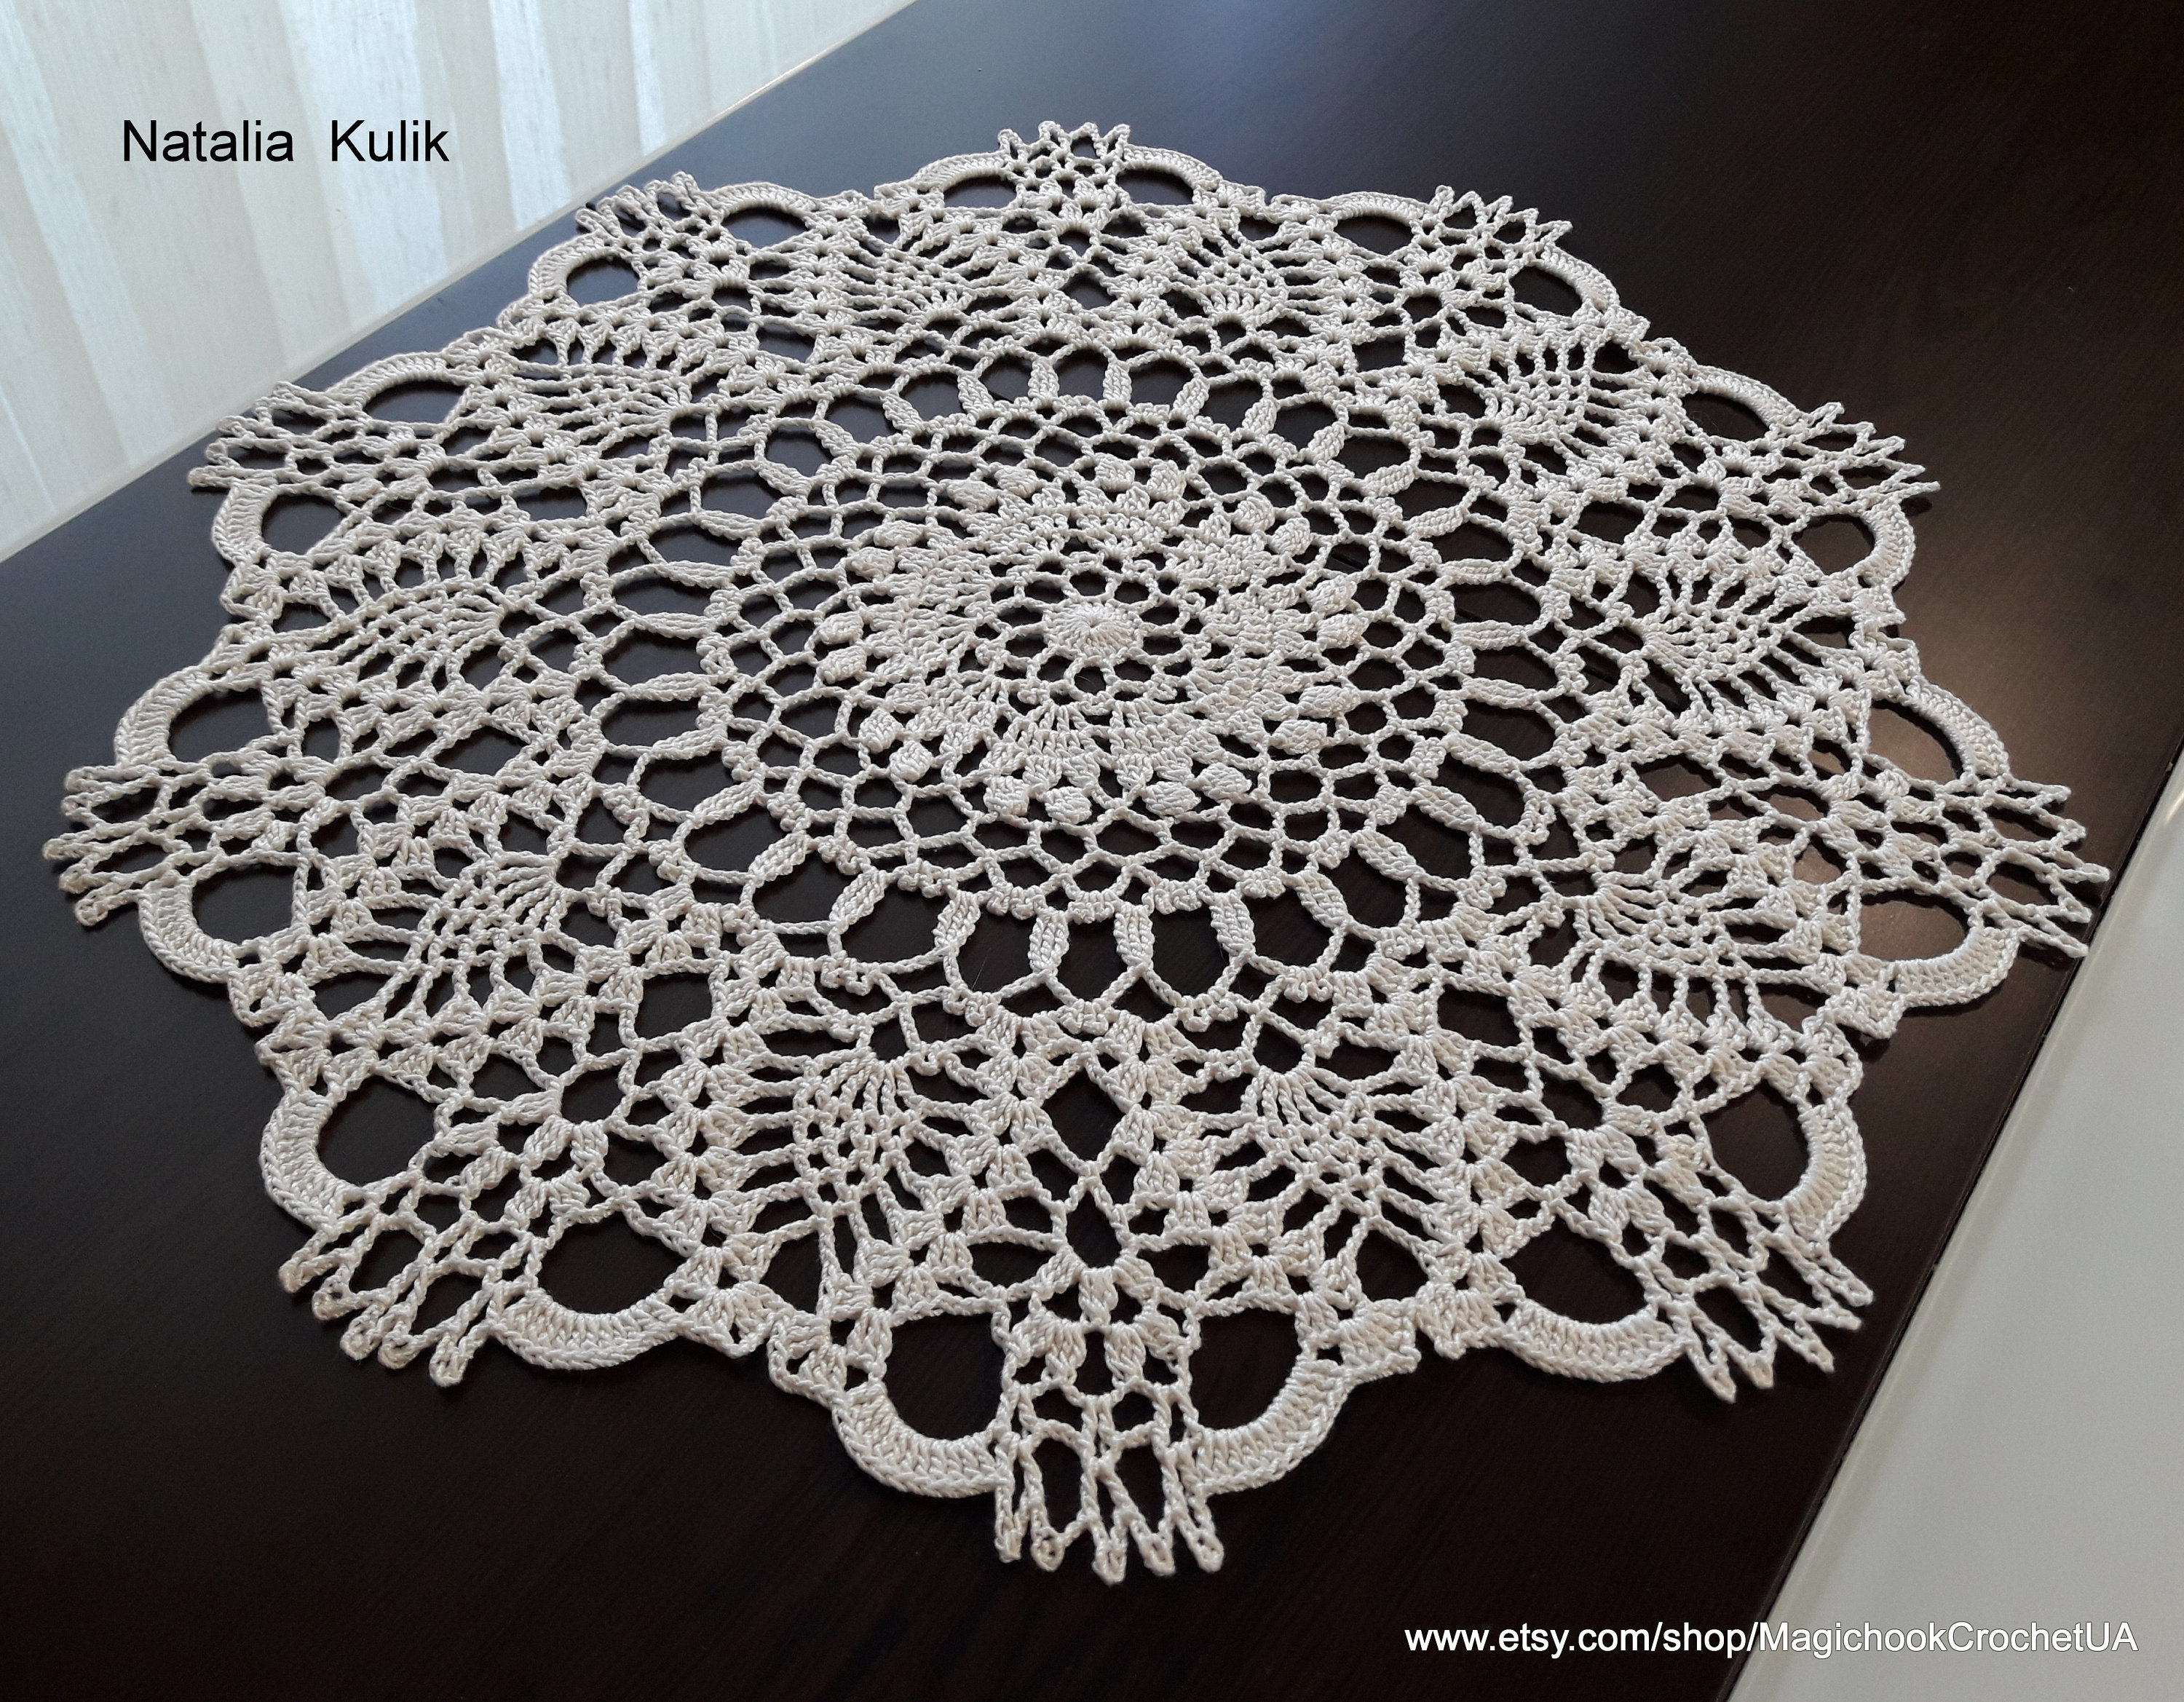 Small simple doily 4 inch. Round lace crochet applique